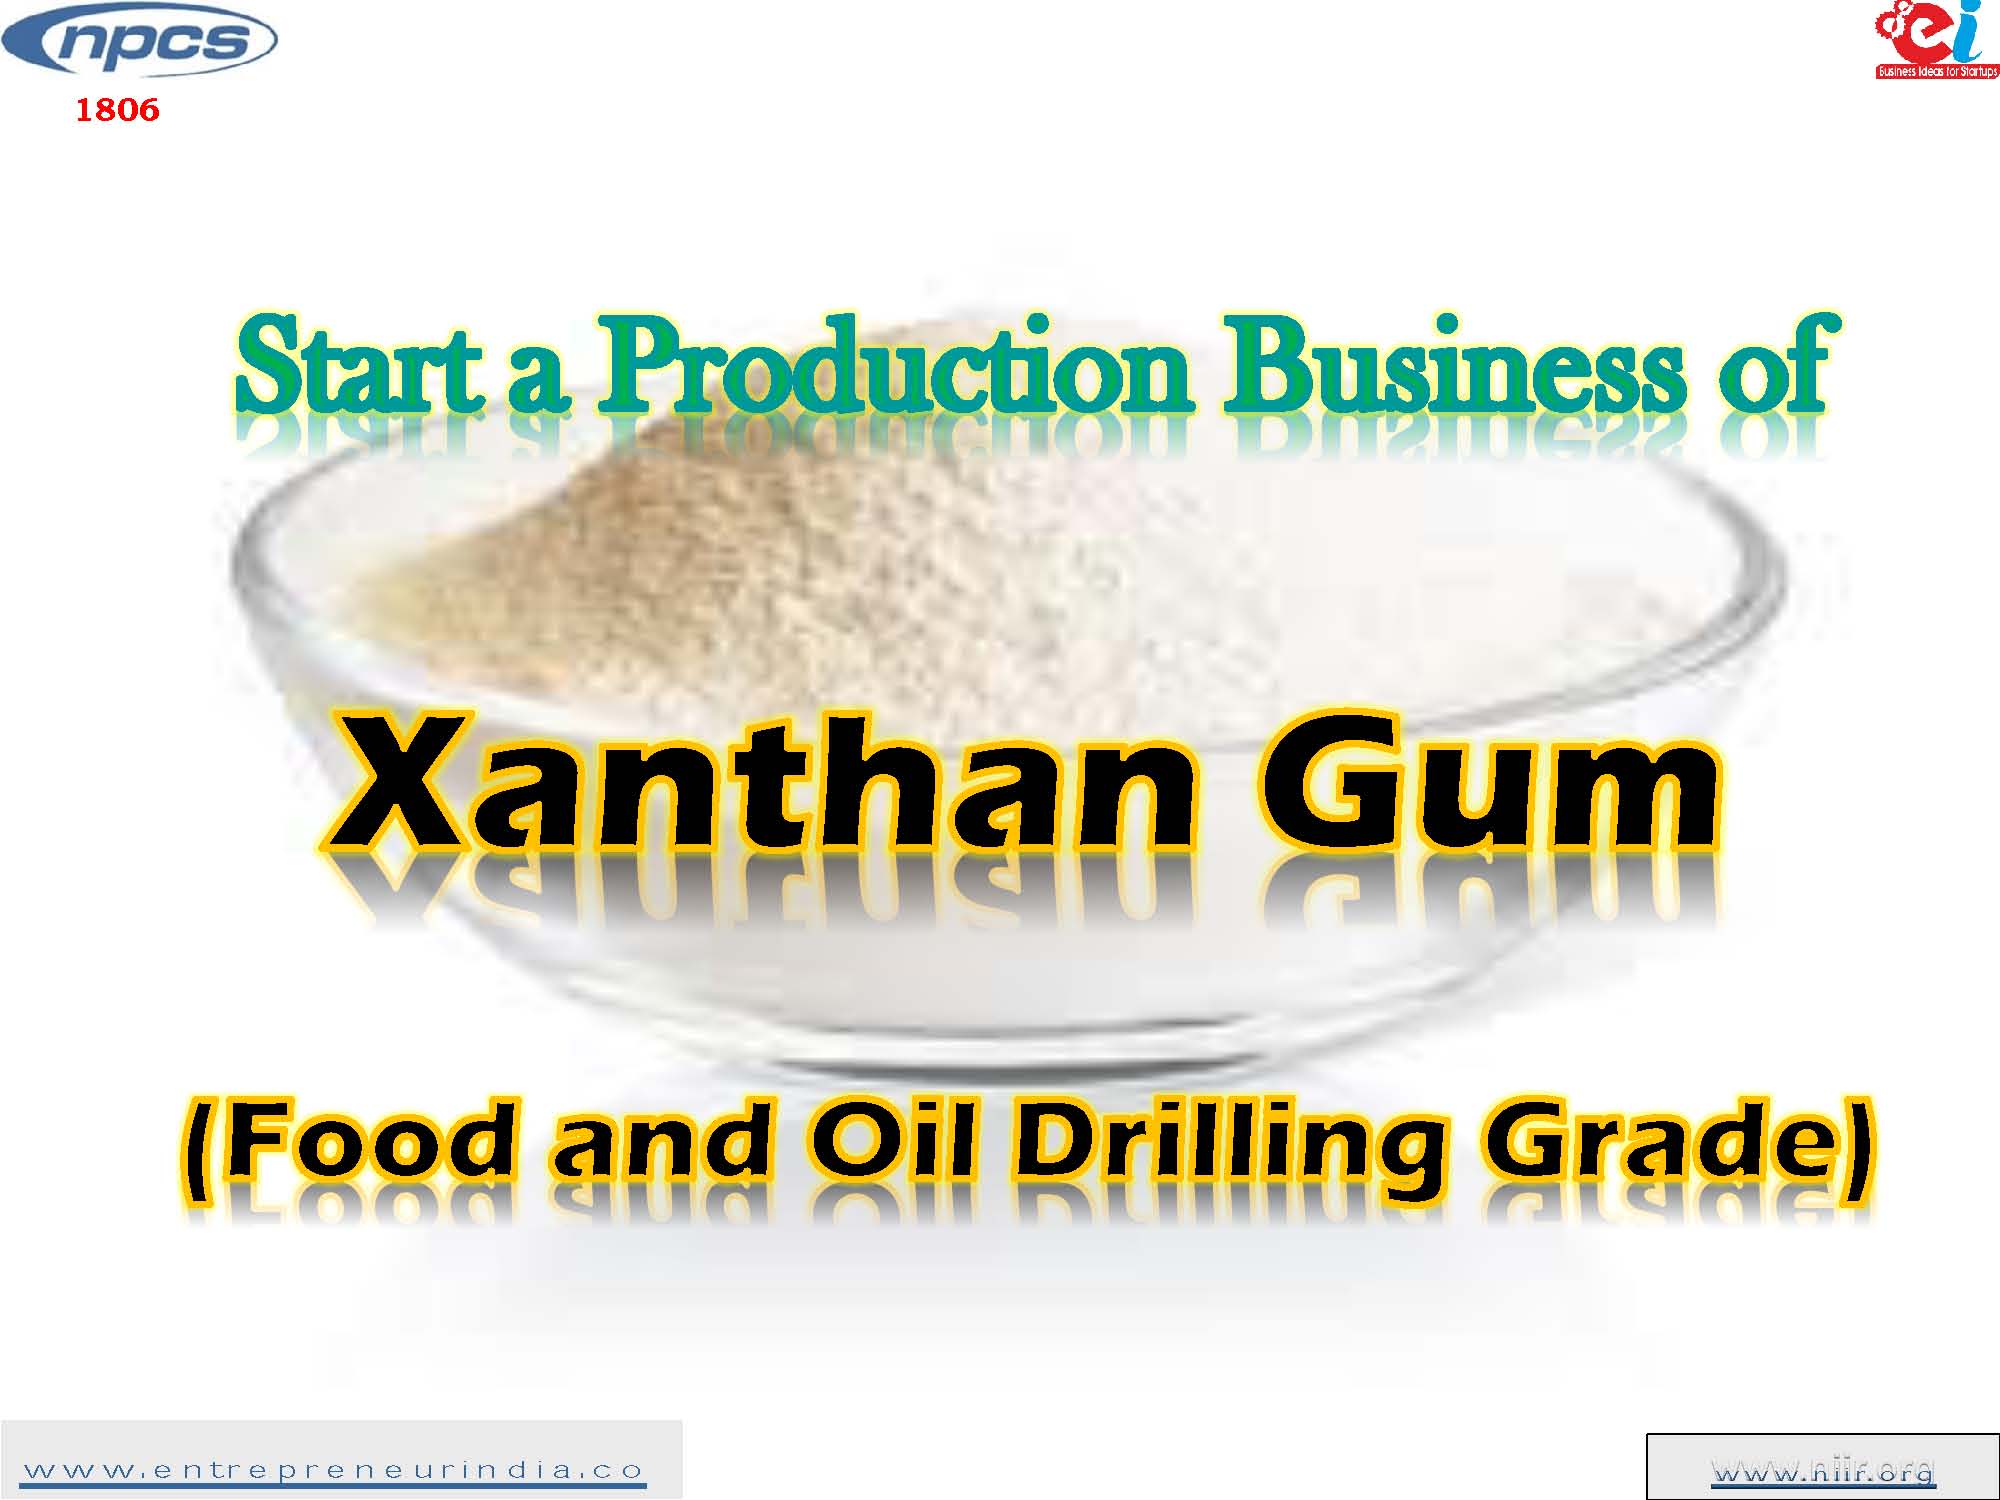 Start a Production Business of Xanthan Gum (Food and Oil Drilling Grade)